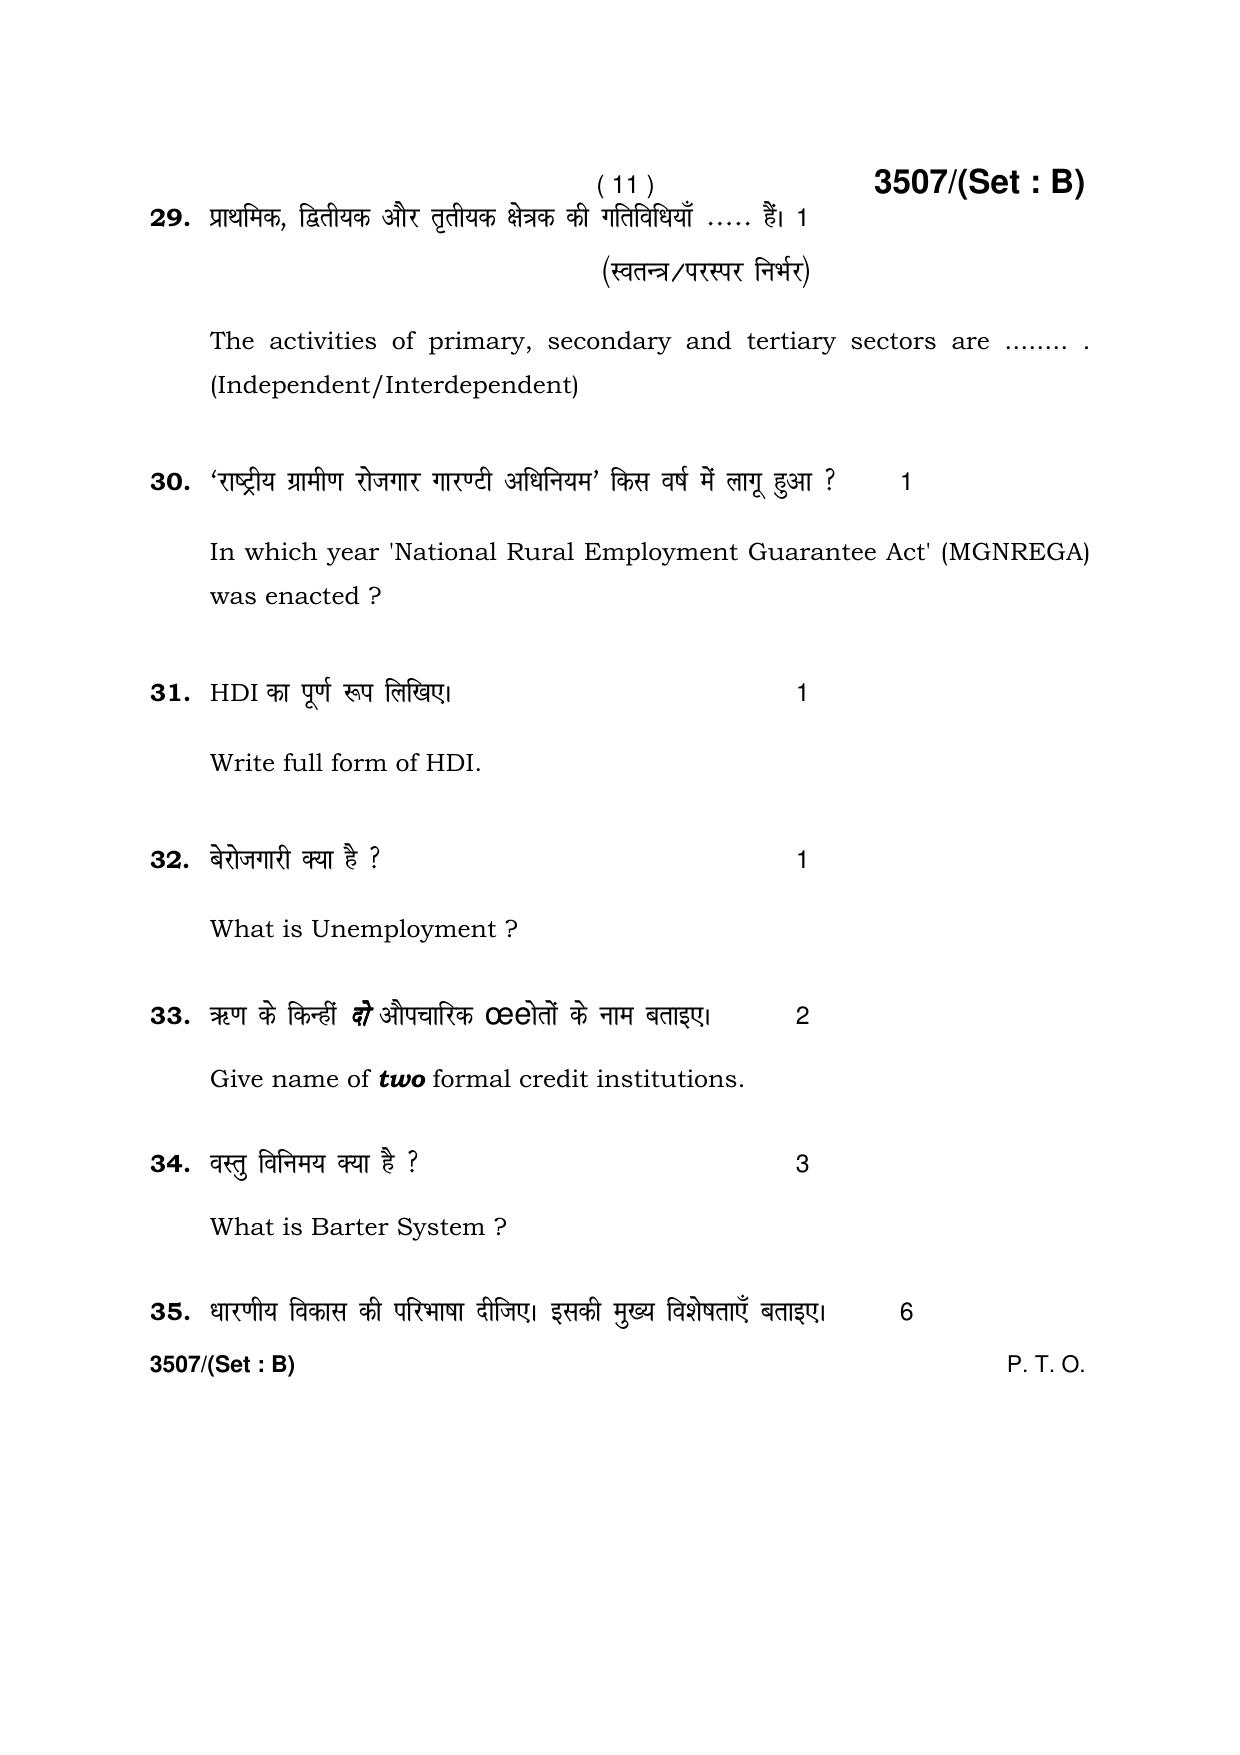 Haryana Board HBSE Class 10 Social Science -B 2018 Question Paper - Page 11